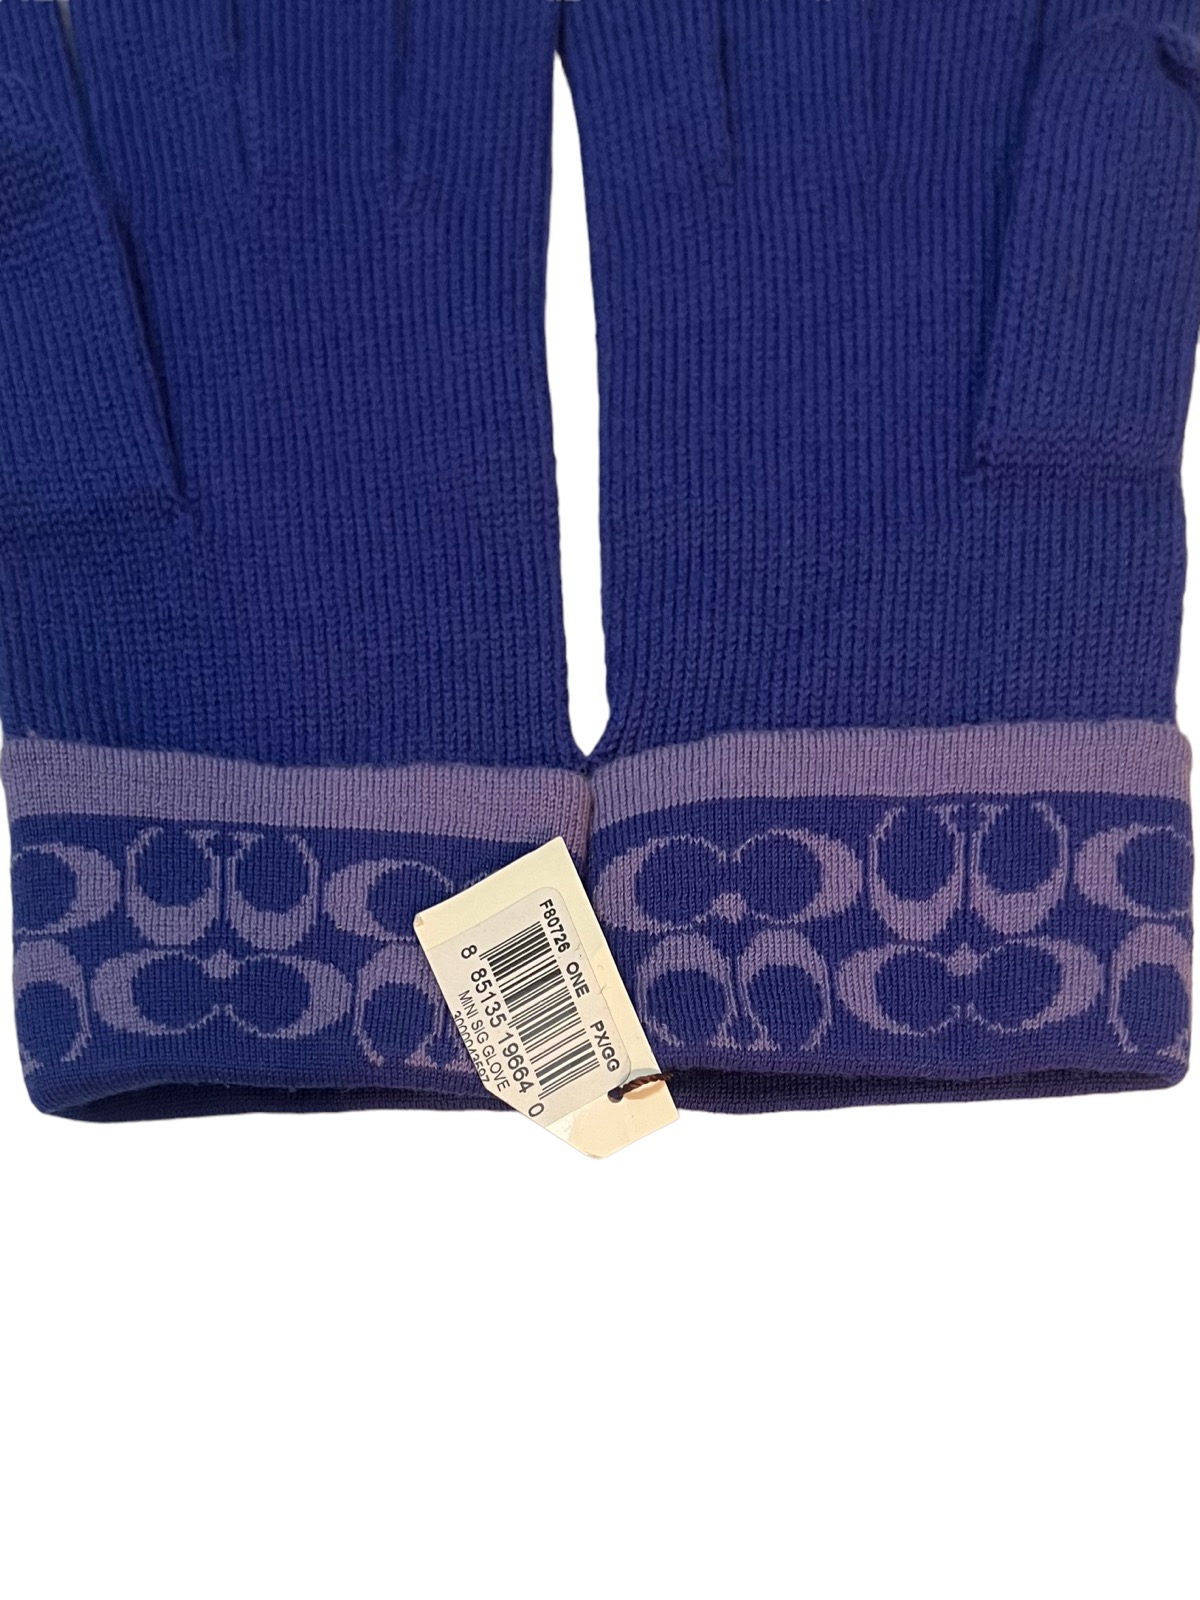 Coach - COACH ( NEW OLD STOCK ) (NOS) SIGNATURE KNIT TECH GLOVES - 7